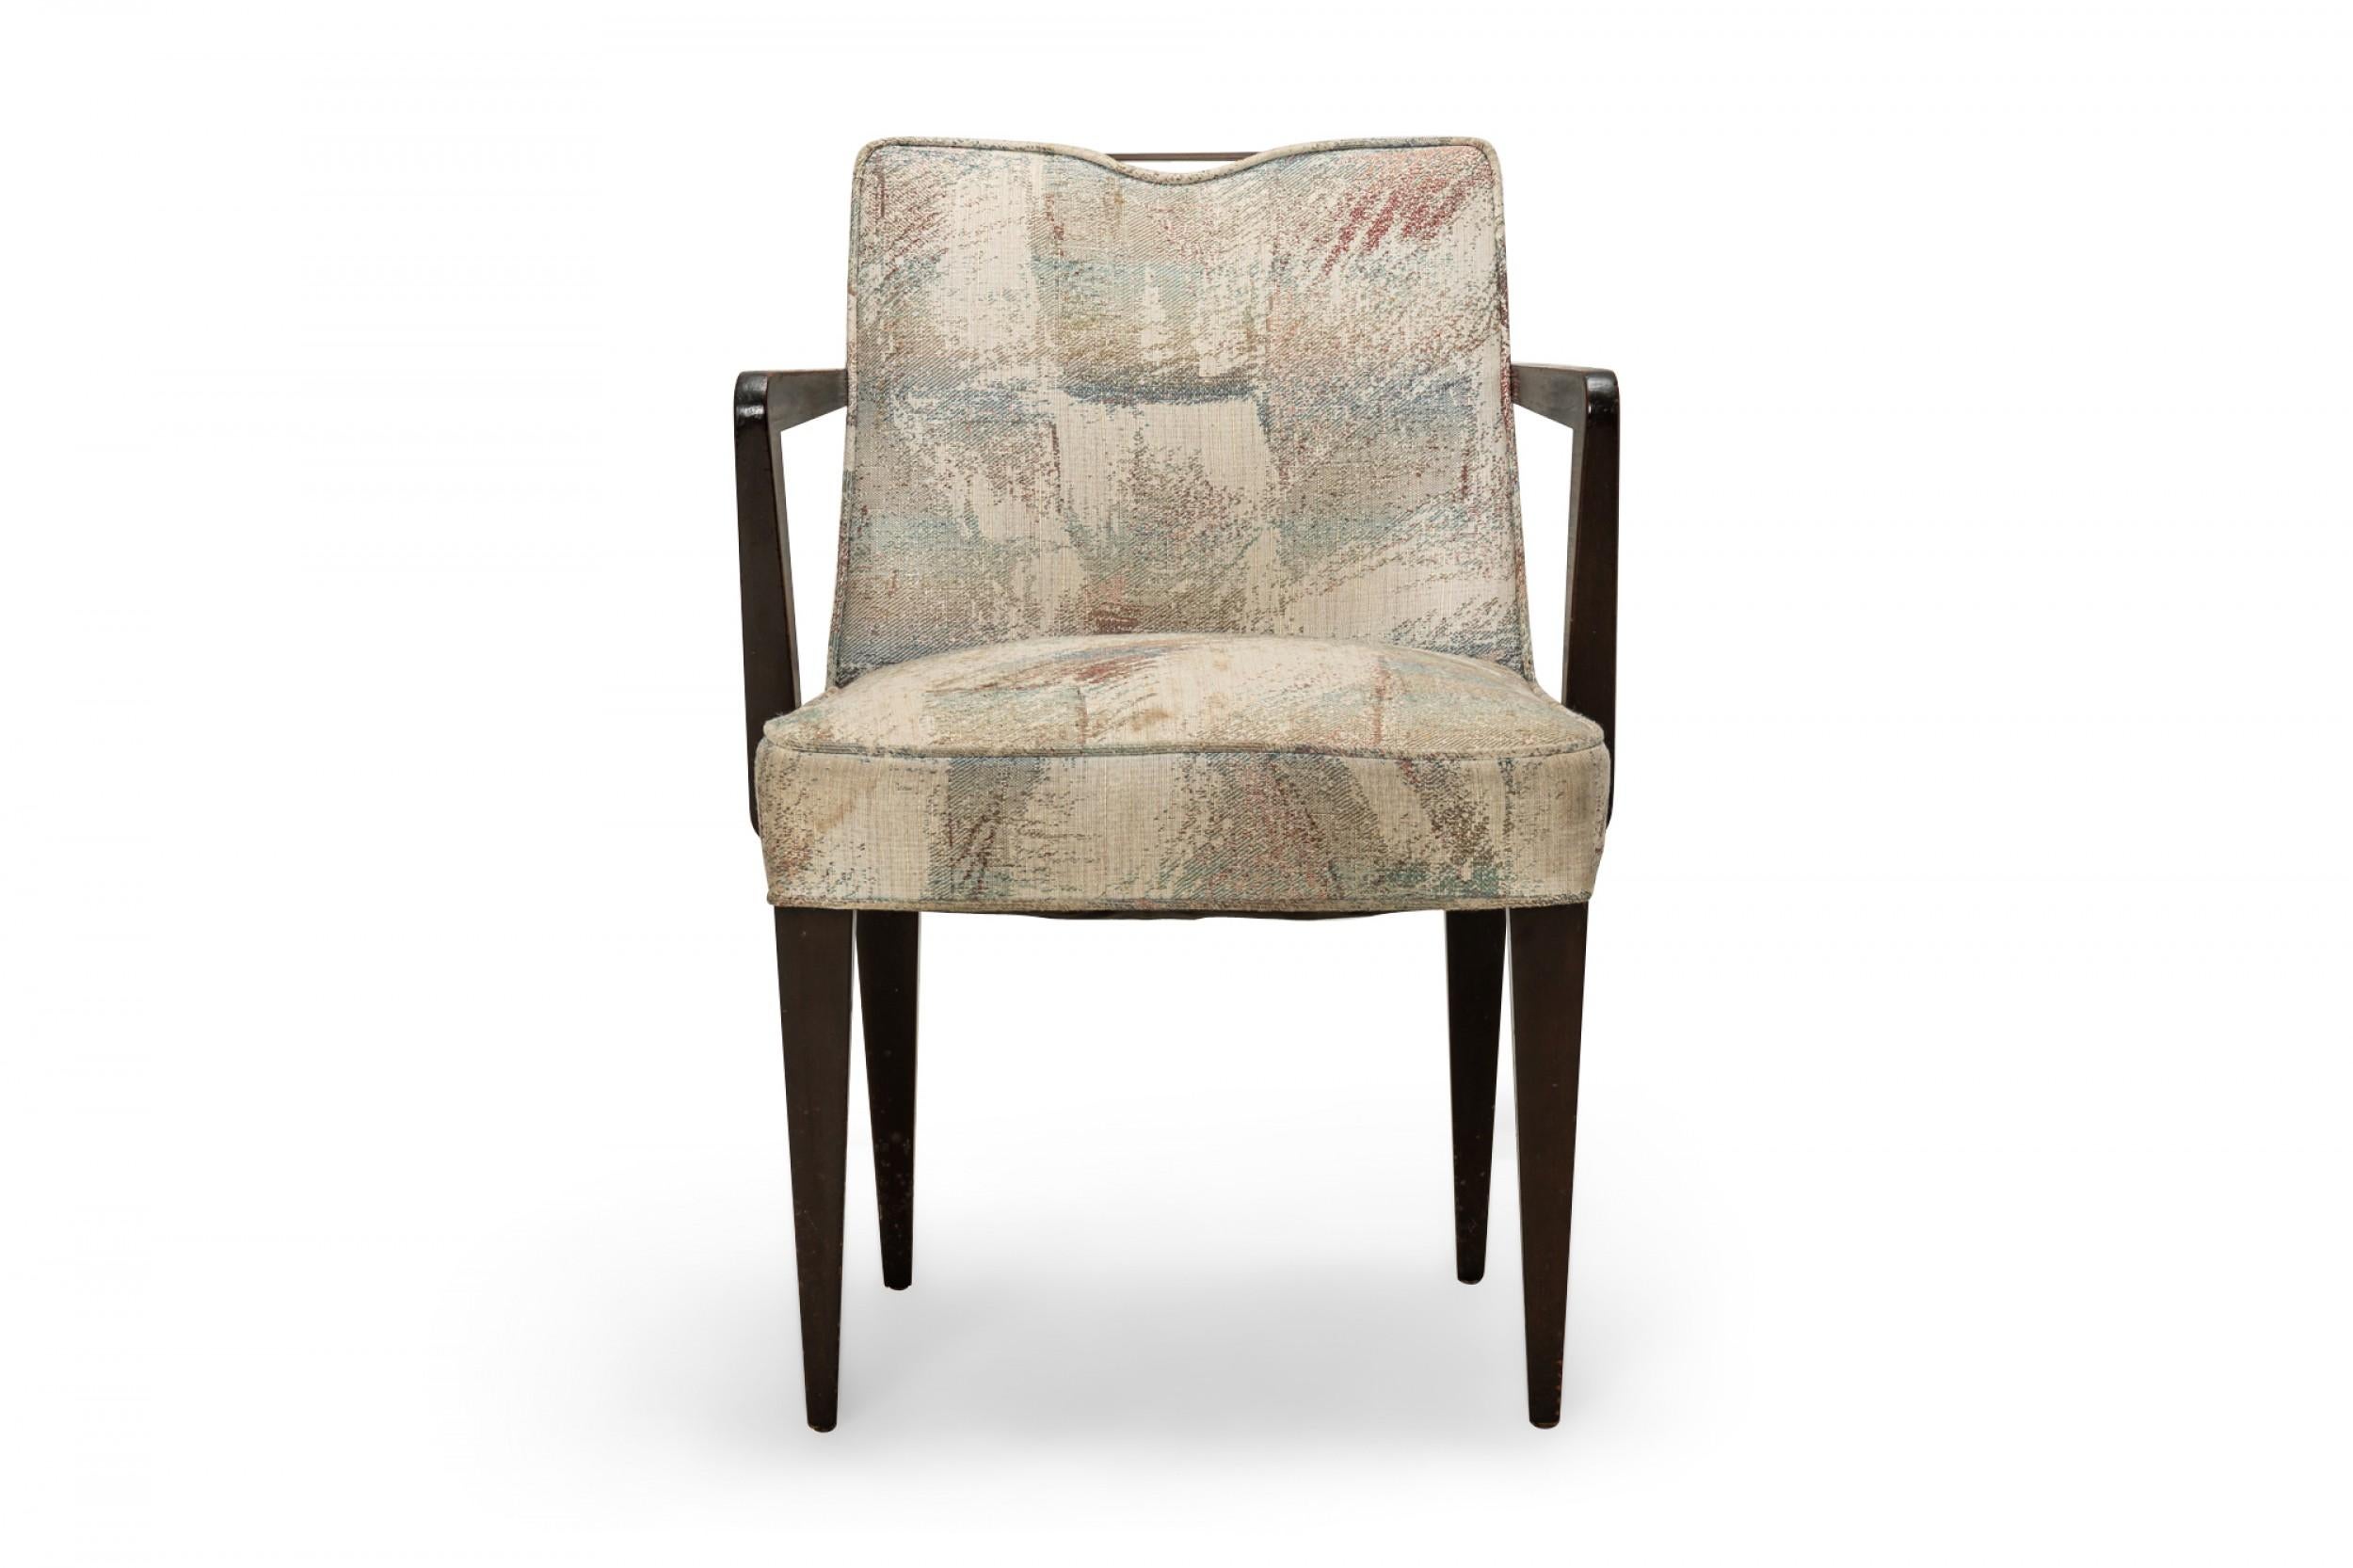 Set of 6 American mid-century dining chairs (2 arms and 4 sides) with square backs featuring a brass central handle, patterned gray and pastel colored seat and back cushions, resting on four square tapered walnut legs. (EDWARD J WORMLEY FOR DUNBAR